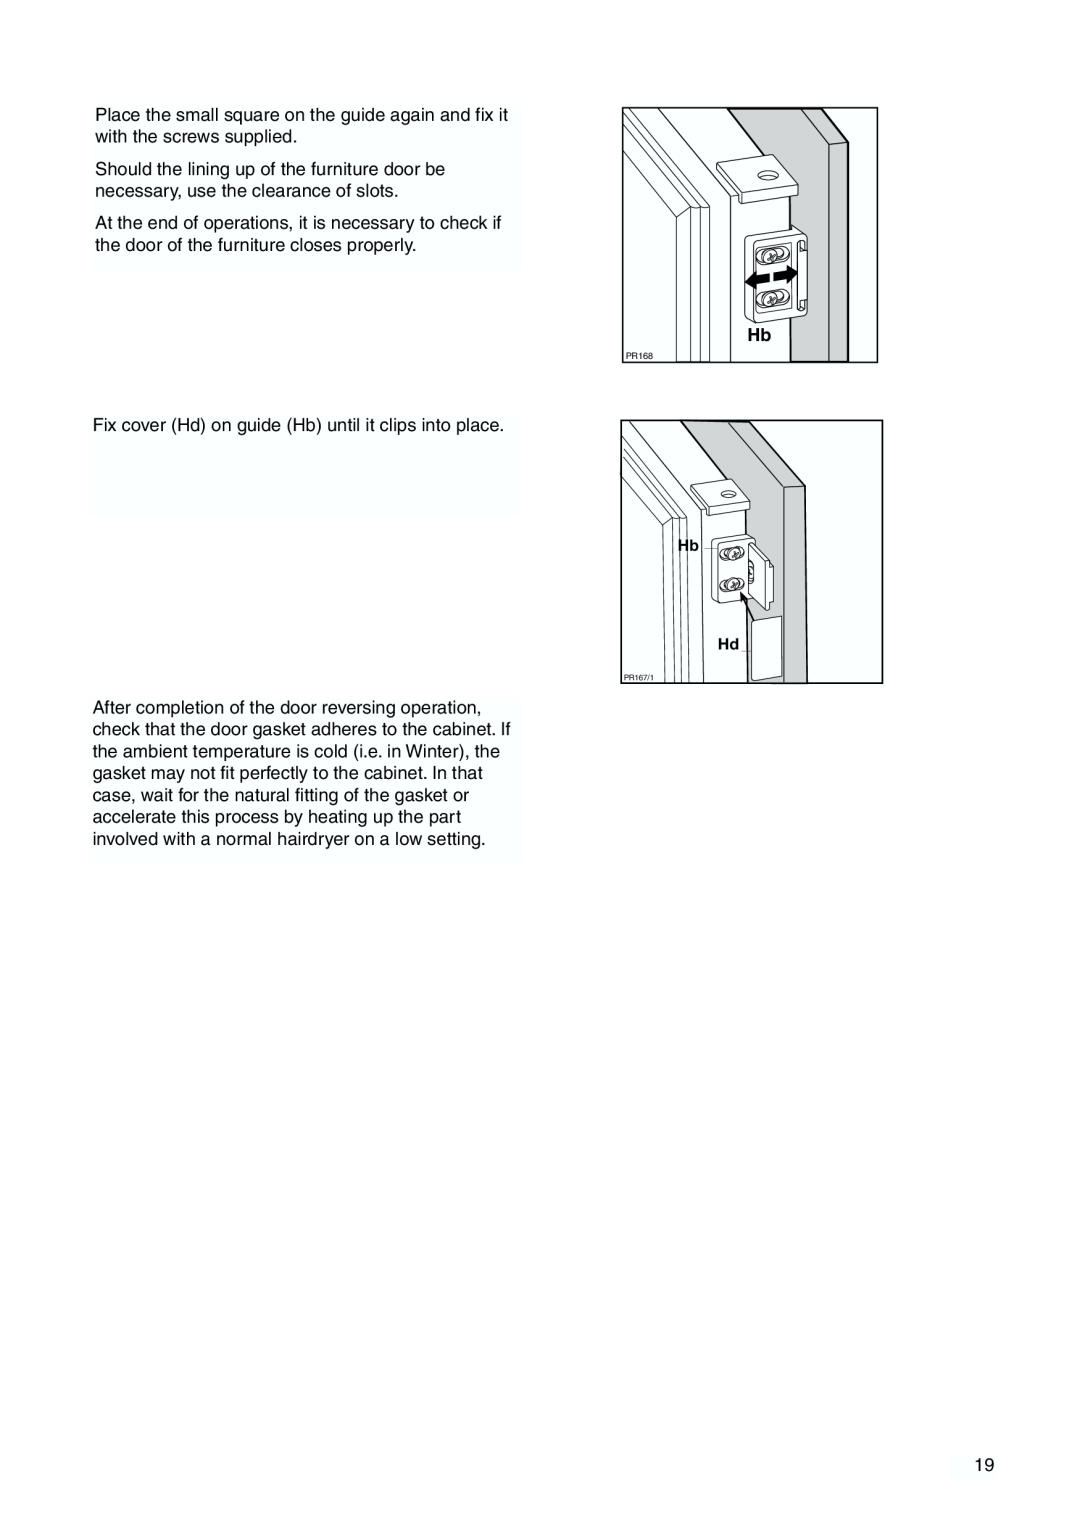 Zanussi ZBB 6244 manual Fix cover Hd on guide Hb until it clips into place 